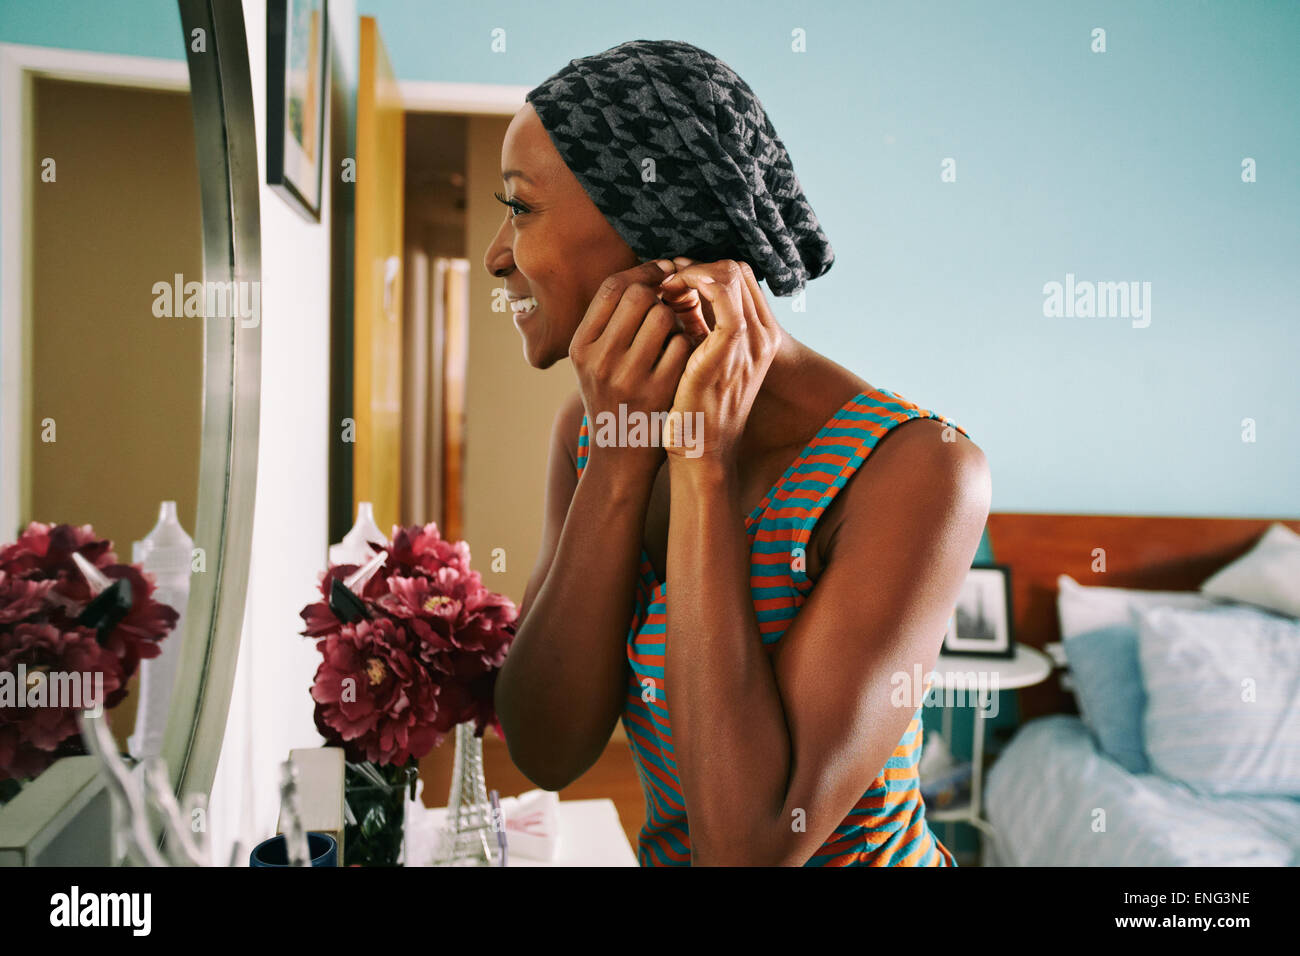 Smiling African American woman attaching earring Stock Photo